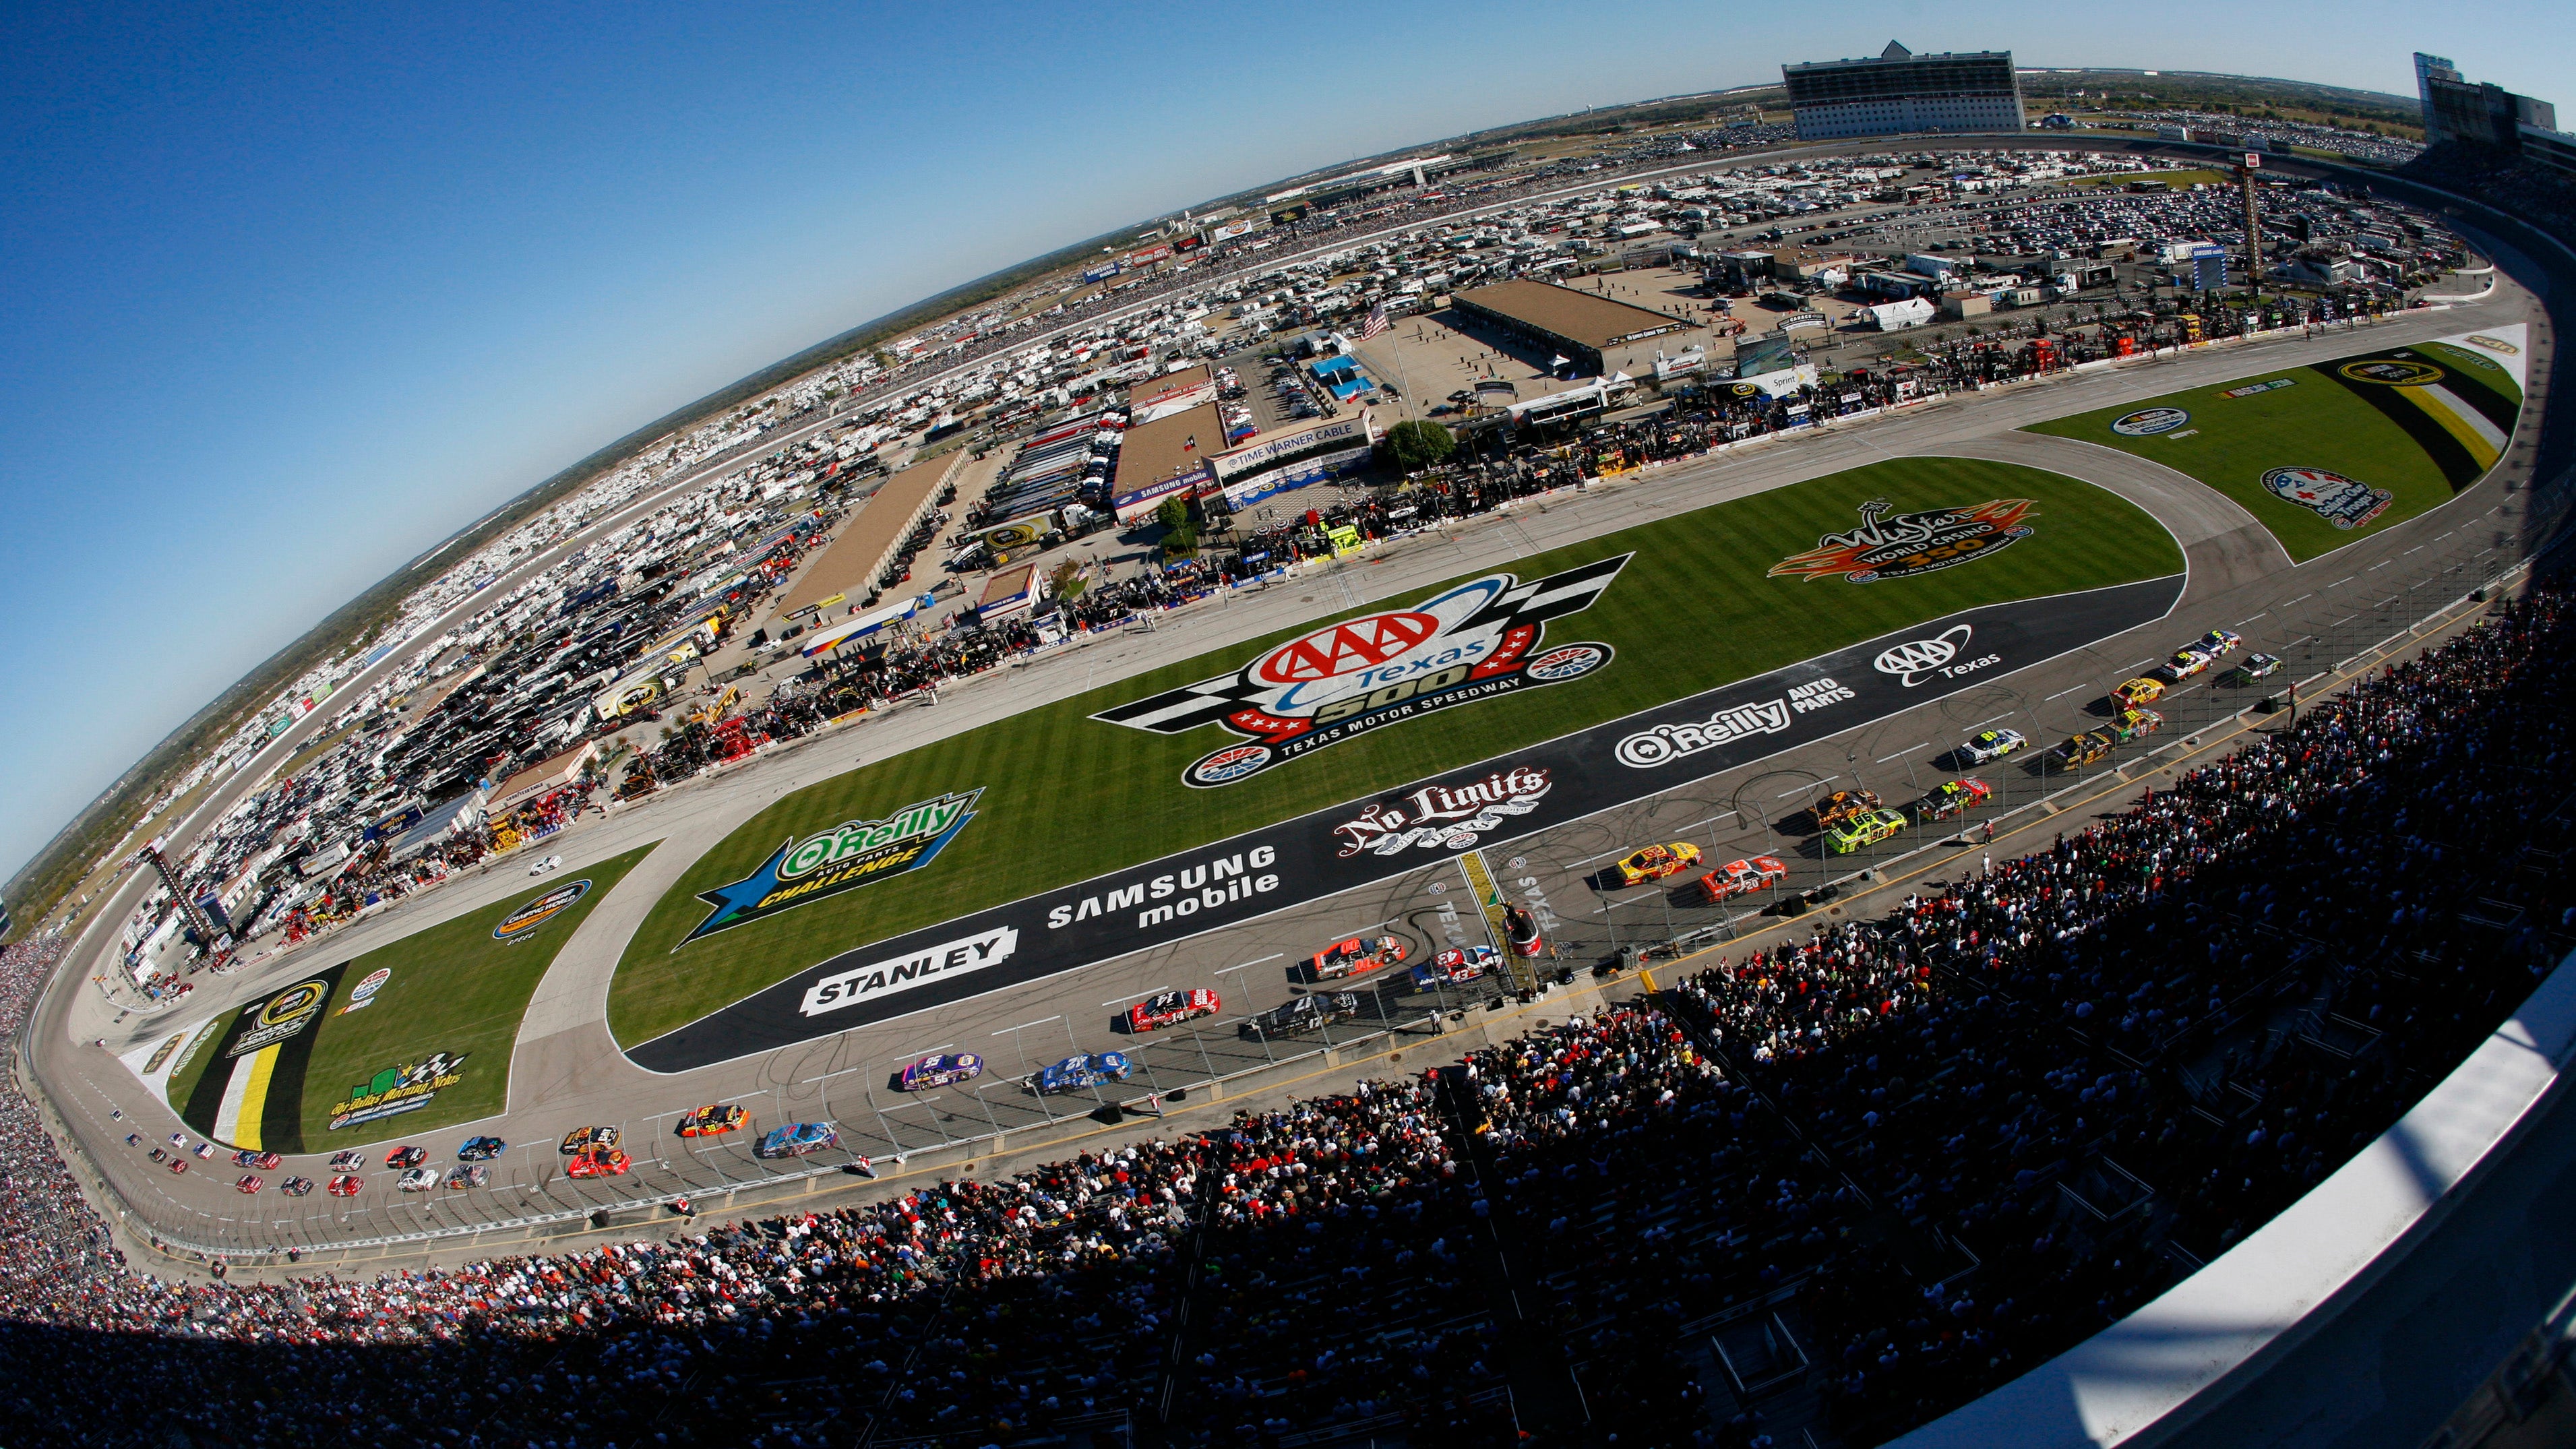 What is that small oval on courses like Texas Motor Speedway used for